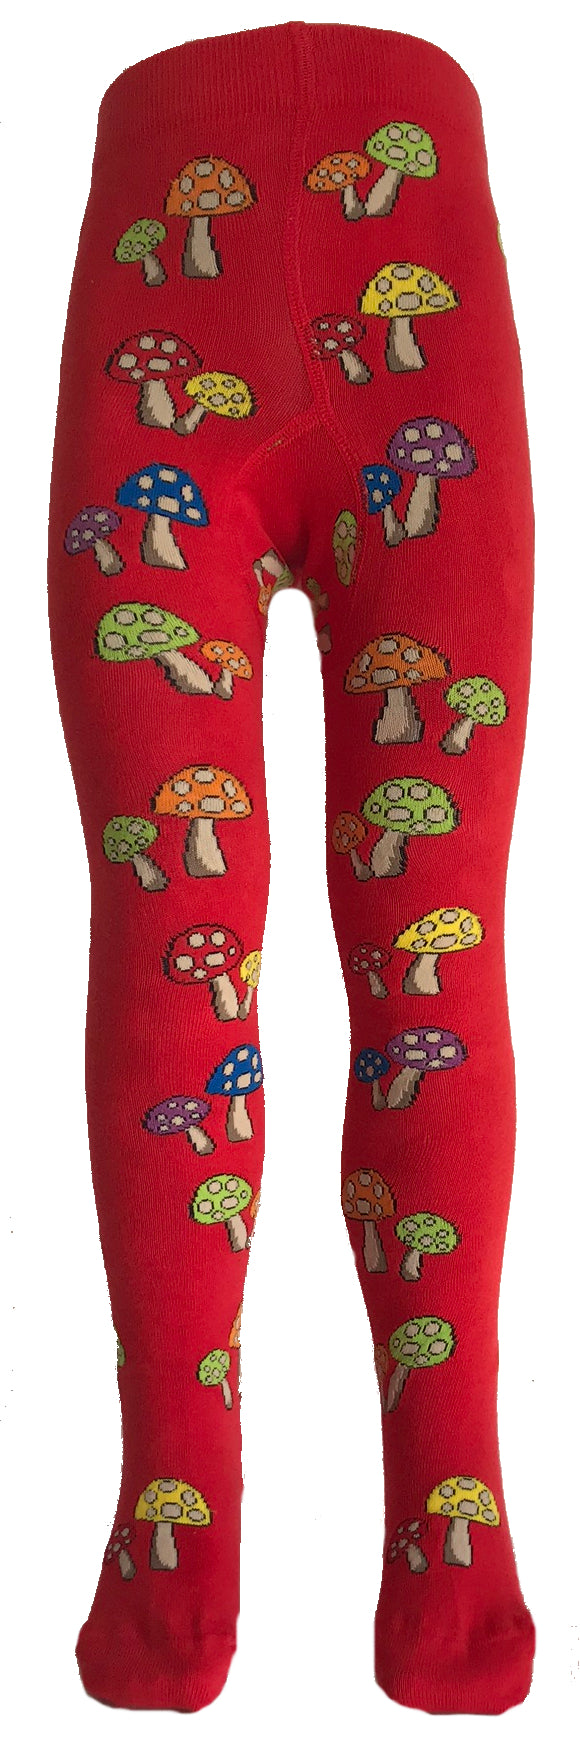 S & S Tights - Fun Guy - Red